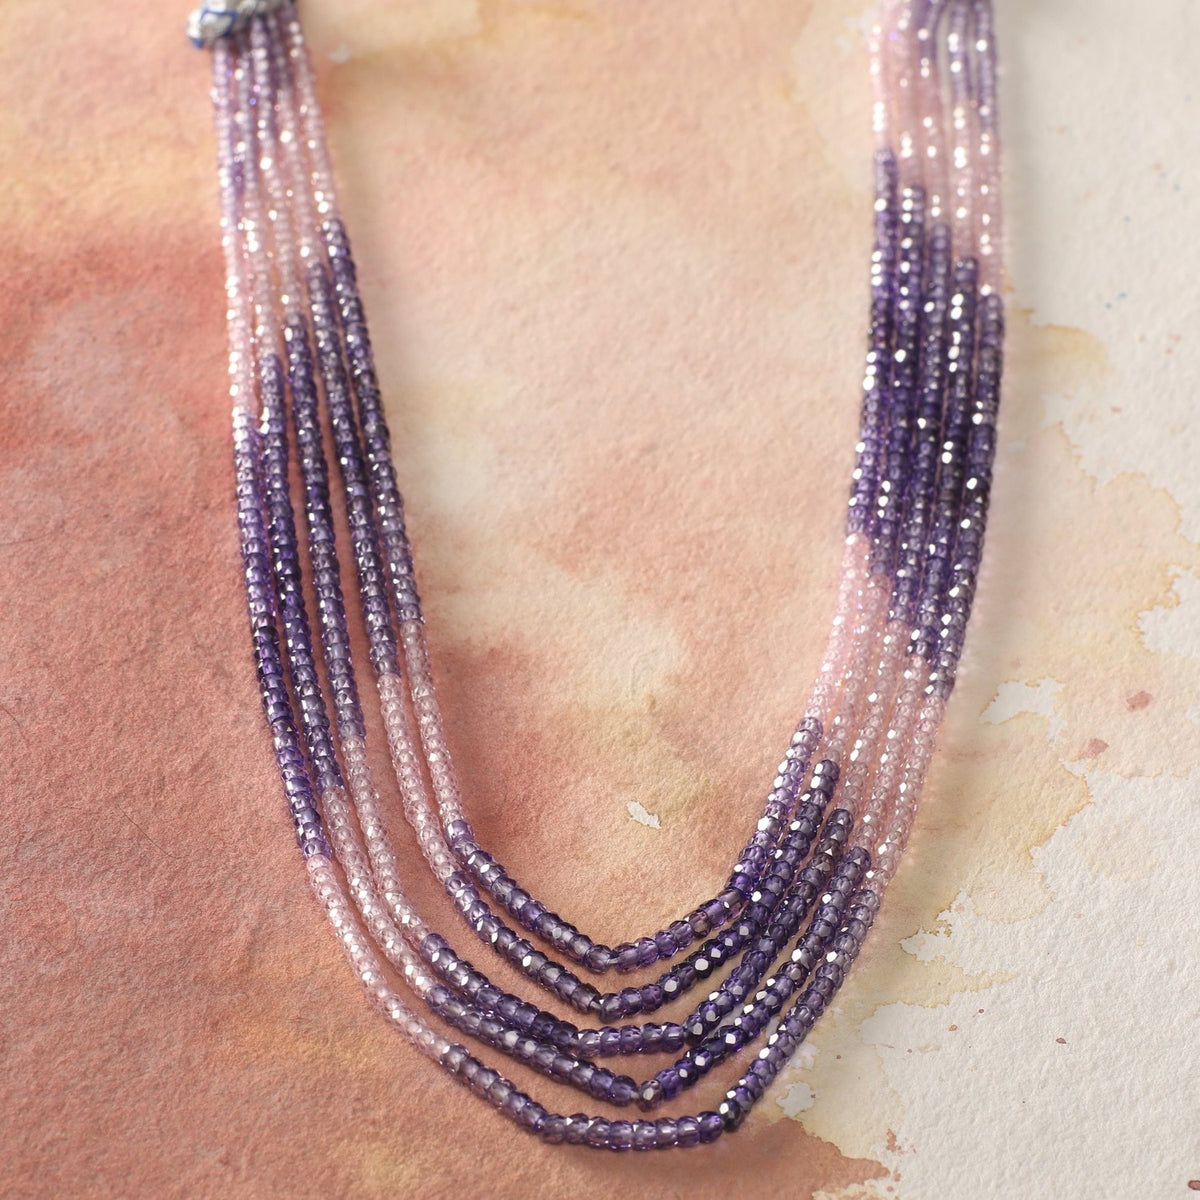 Pink and Purple shaded Faceted Cubic Zirconia Beads Necklace